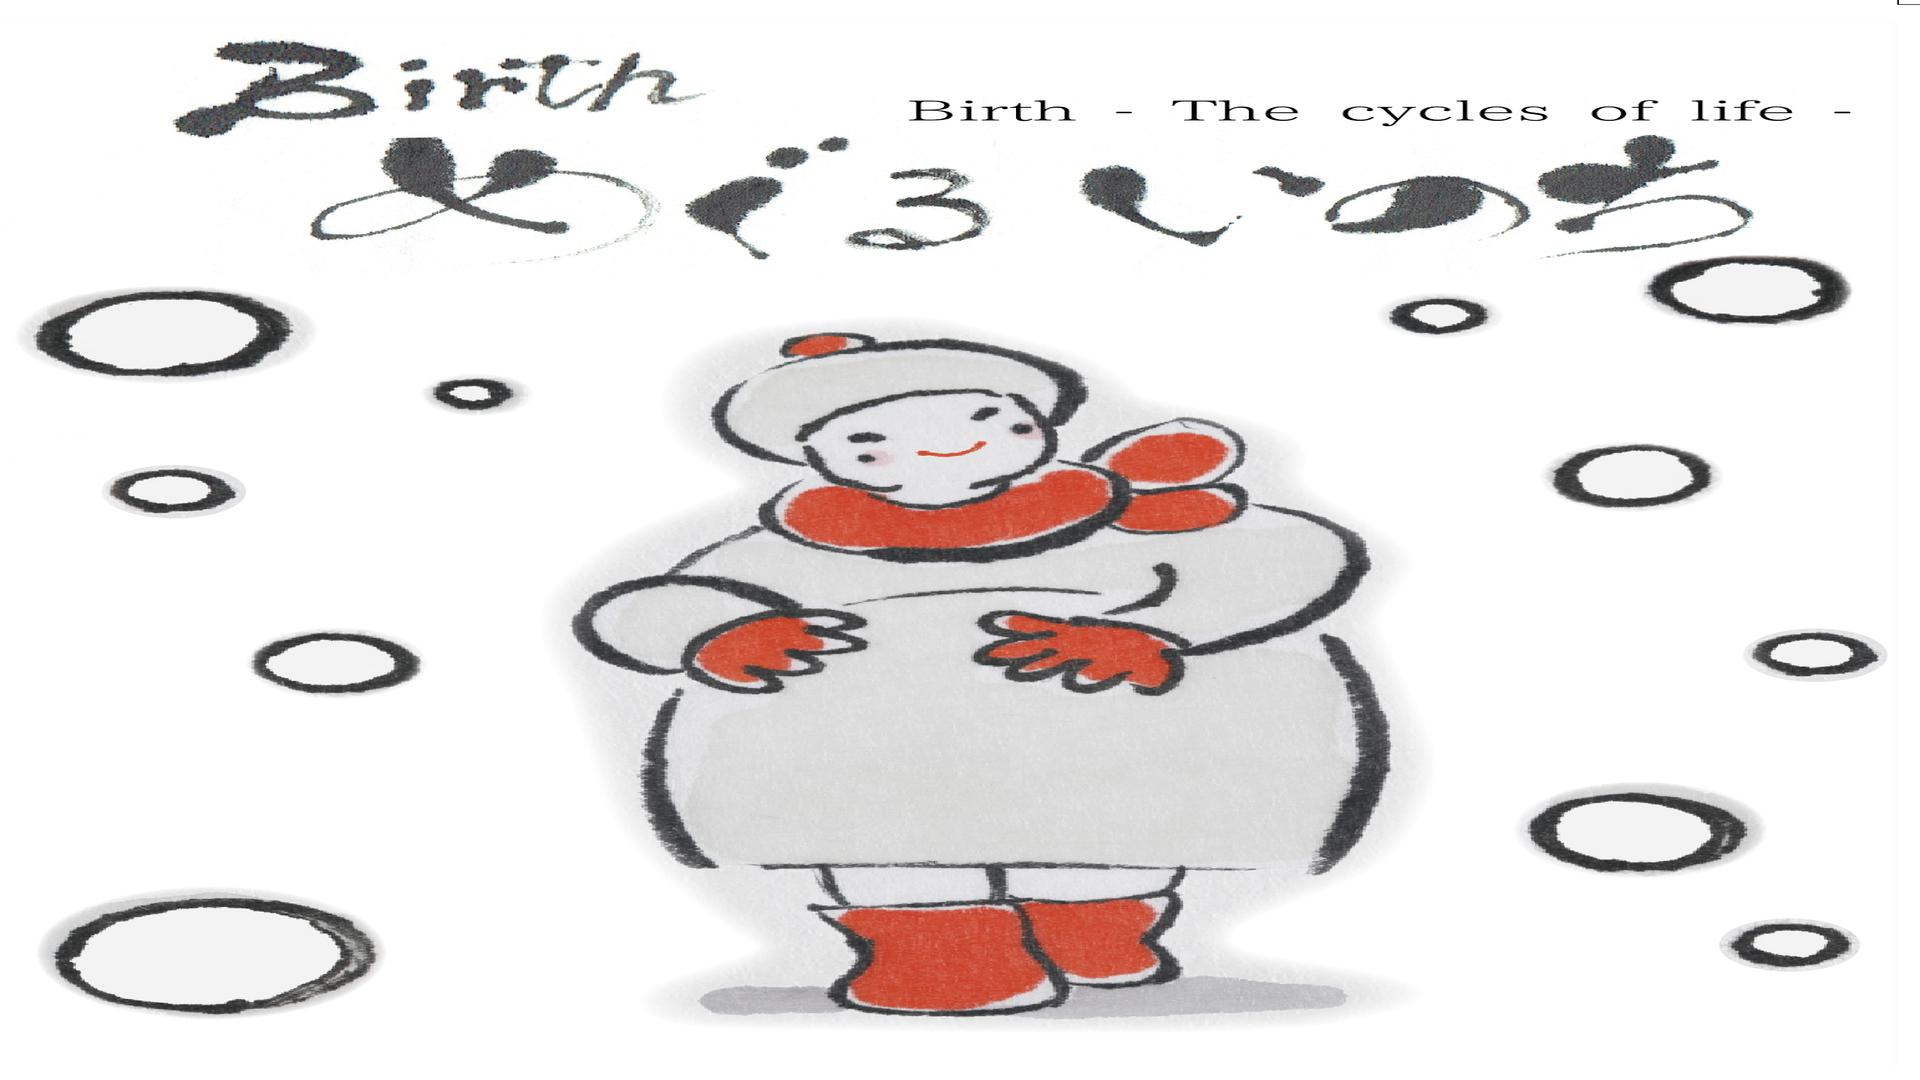 Birth - The cycles of life-